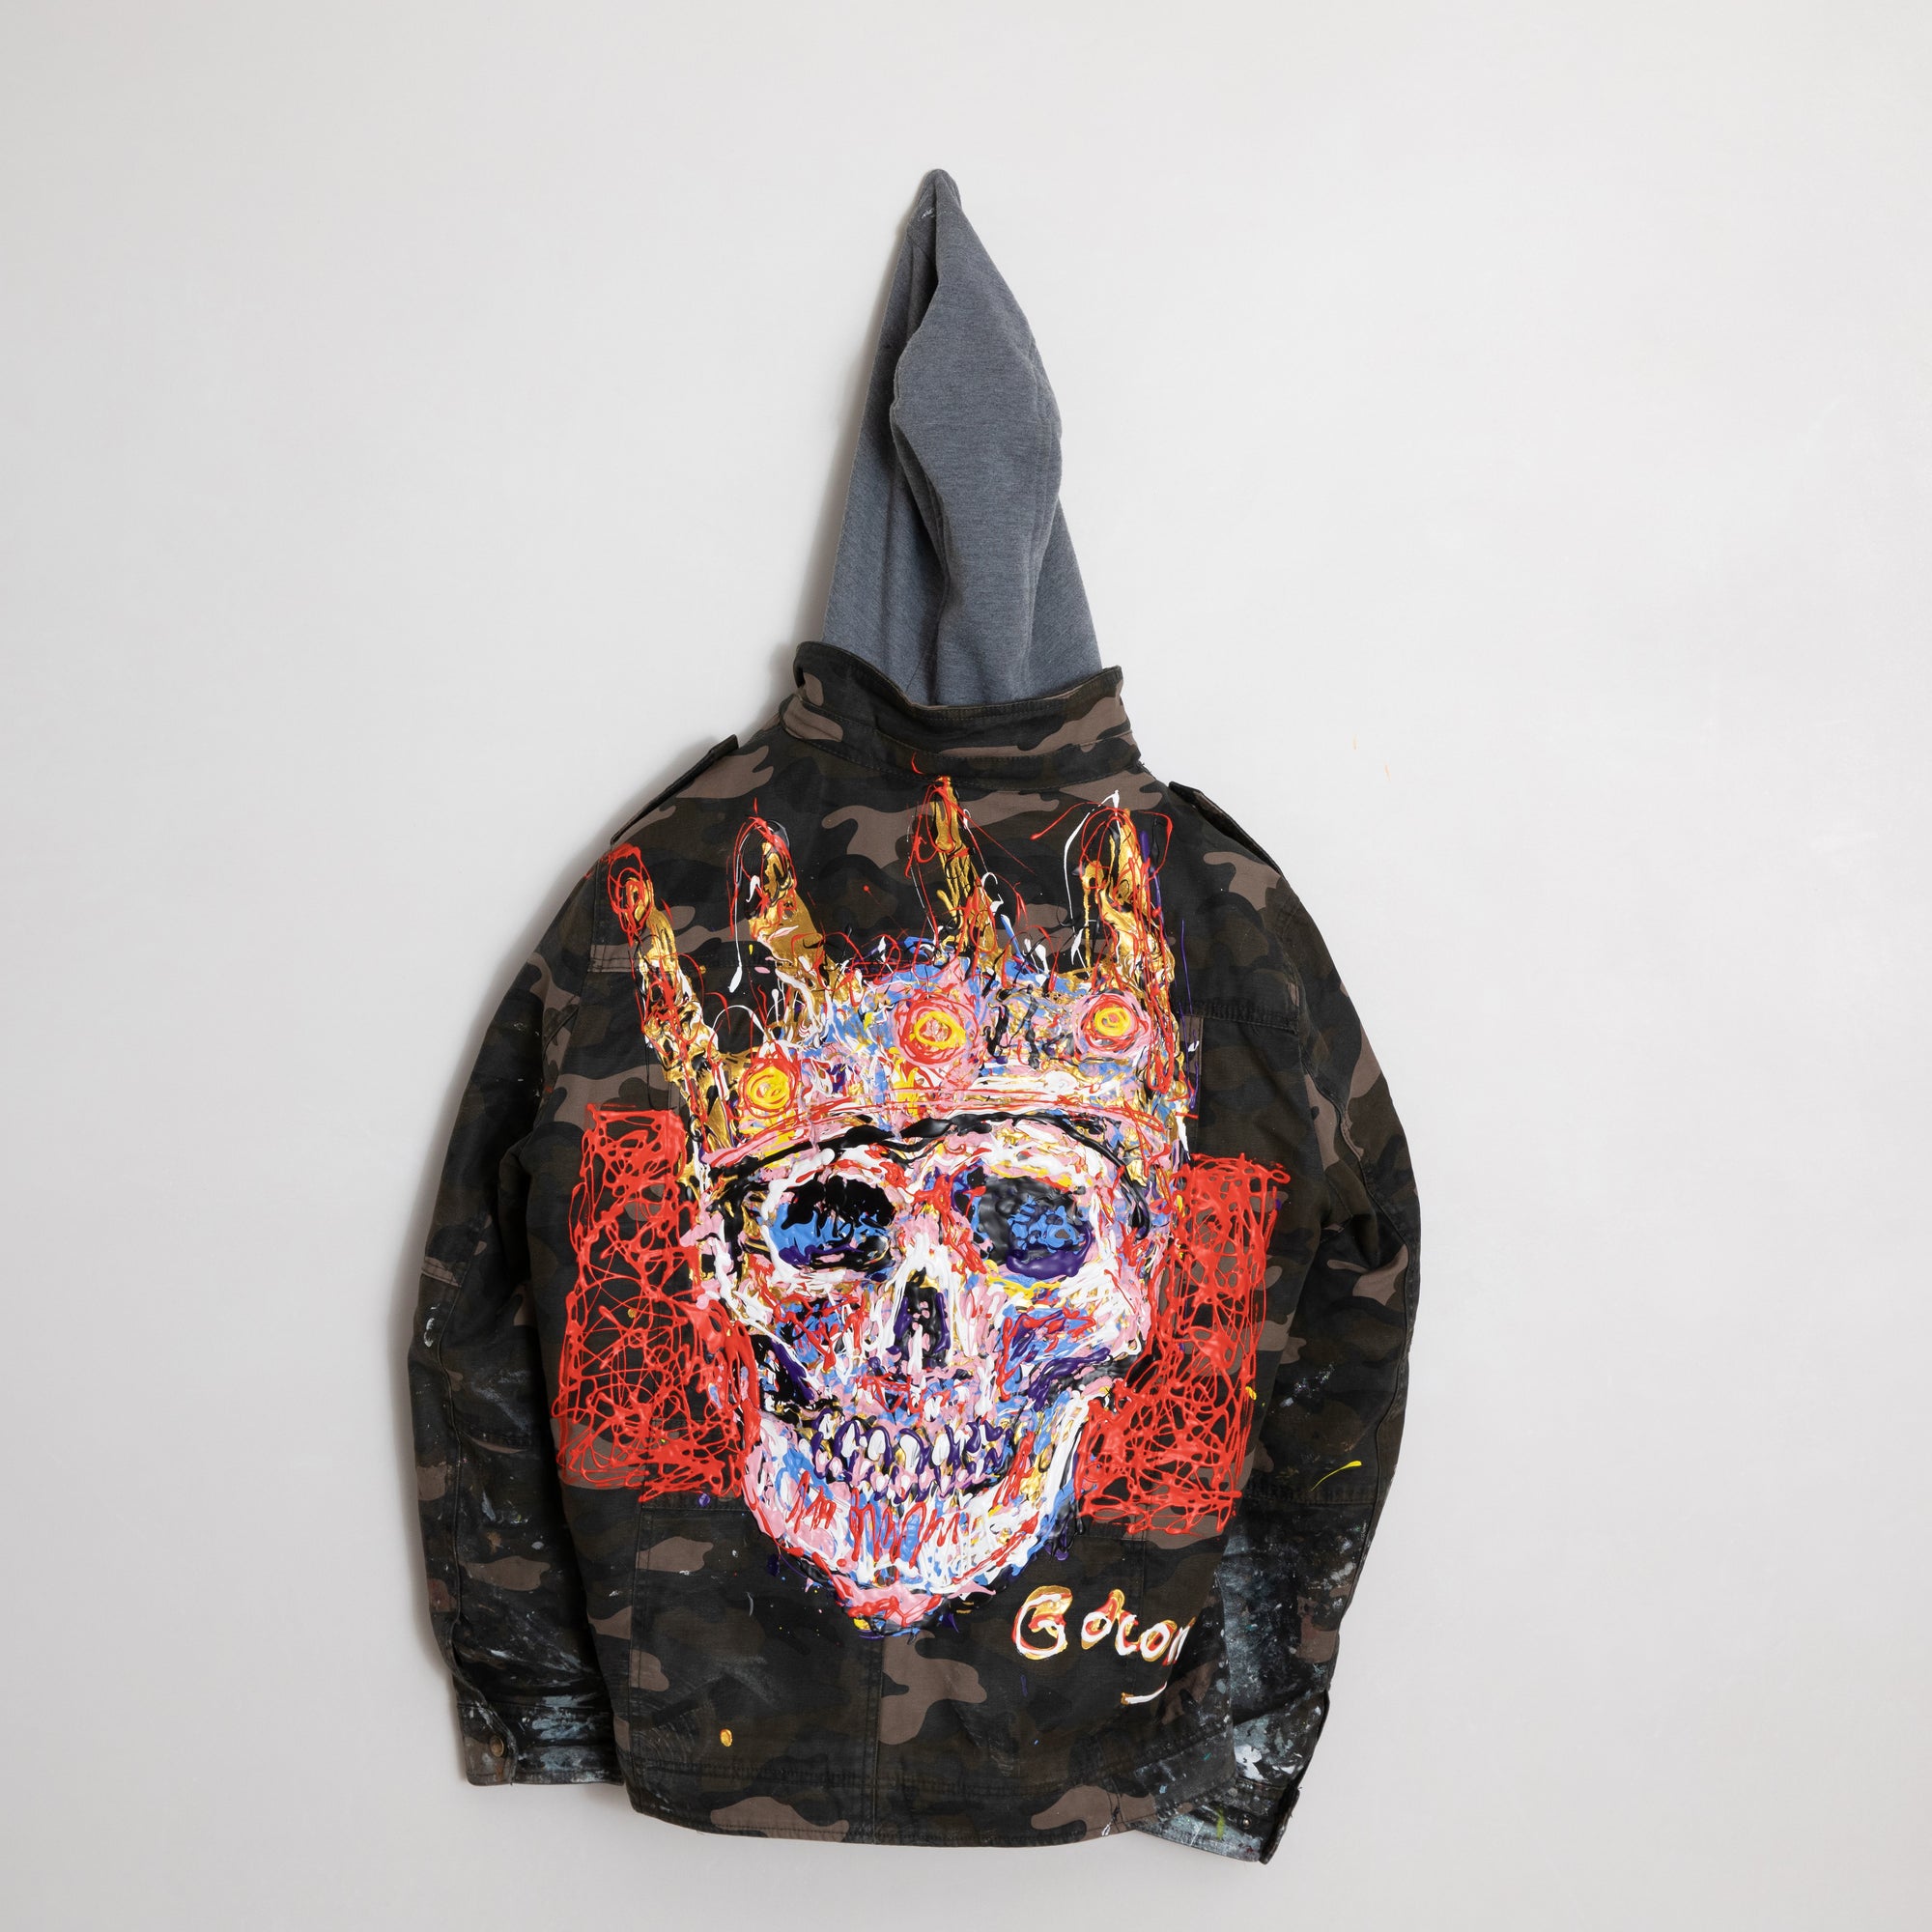 One-off Crowned Skull Jacket